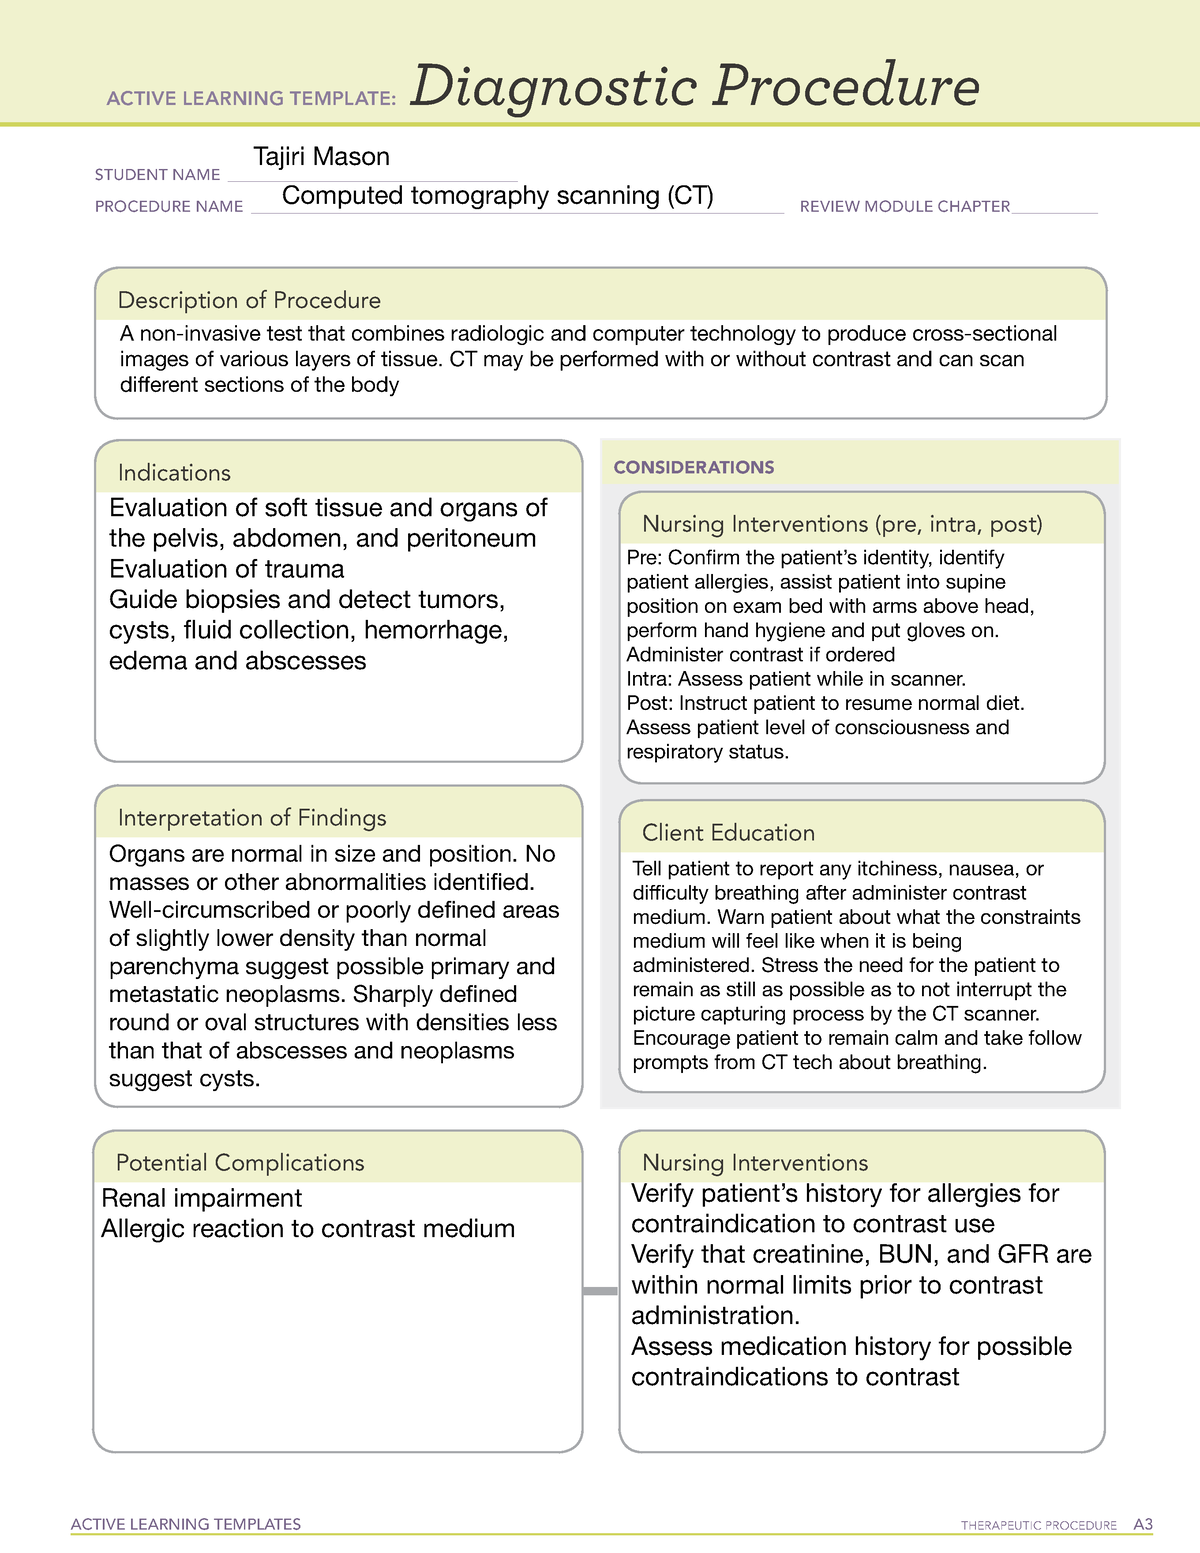 CT Scan ATI template ACTIVE LEARNING TEMPLATES THERAPEUTIC